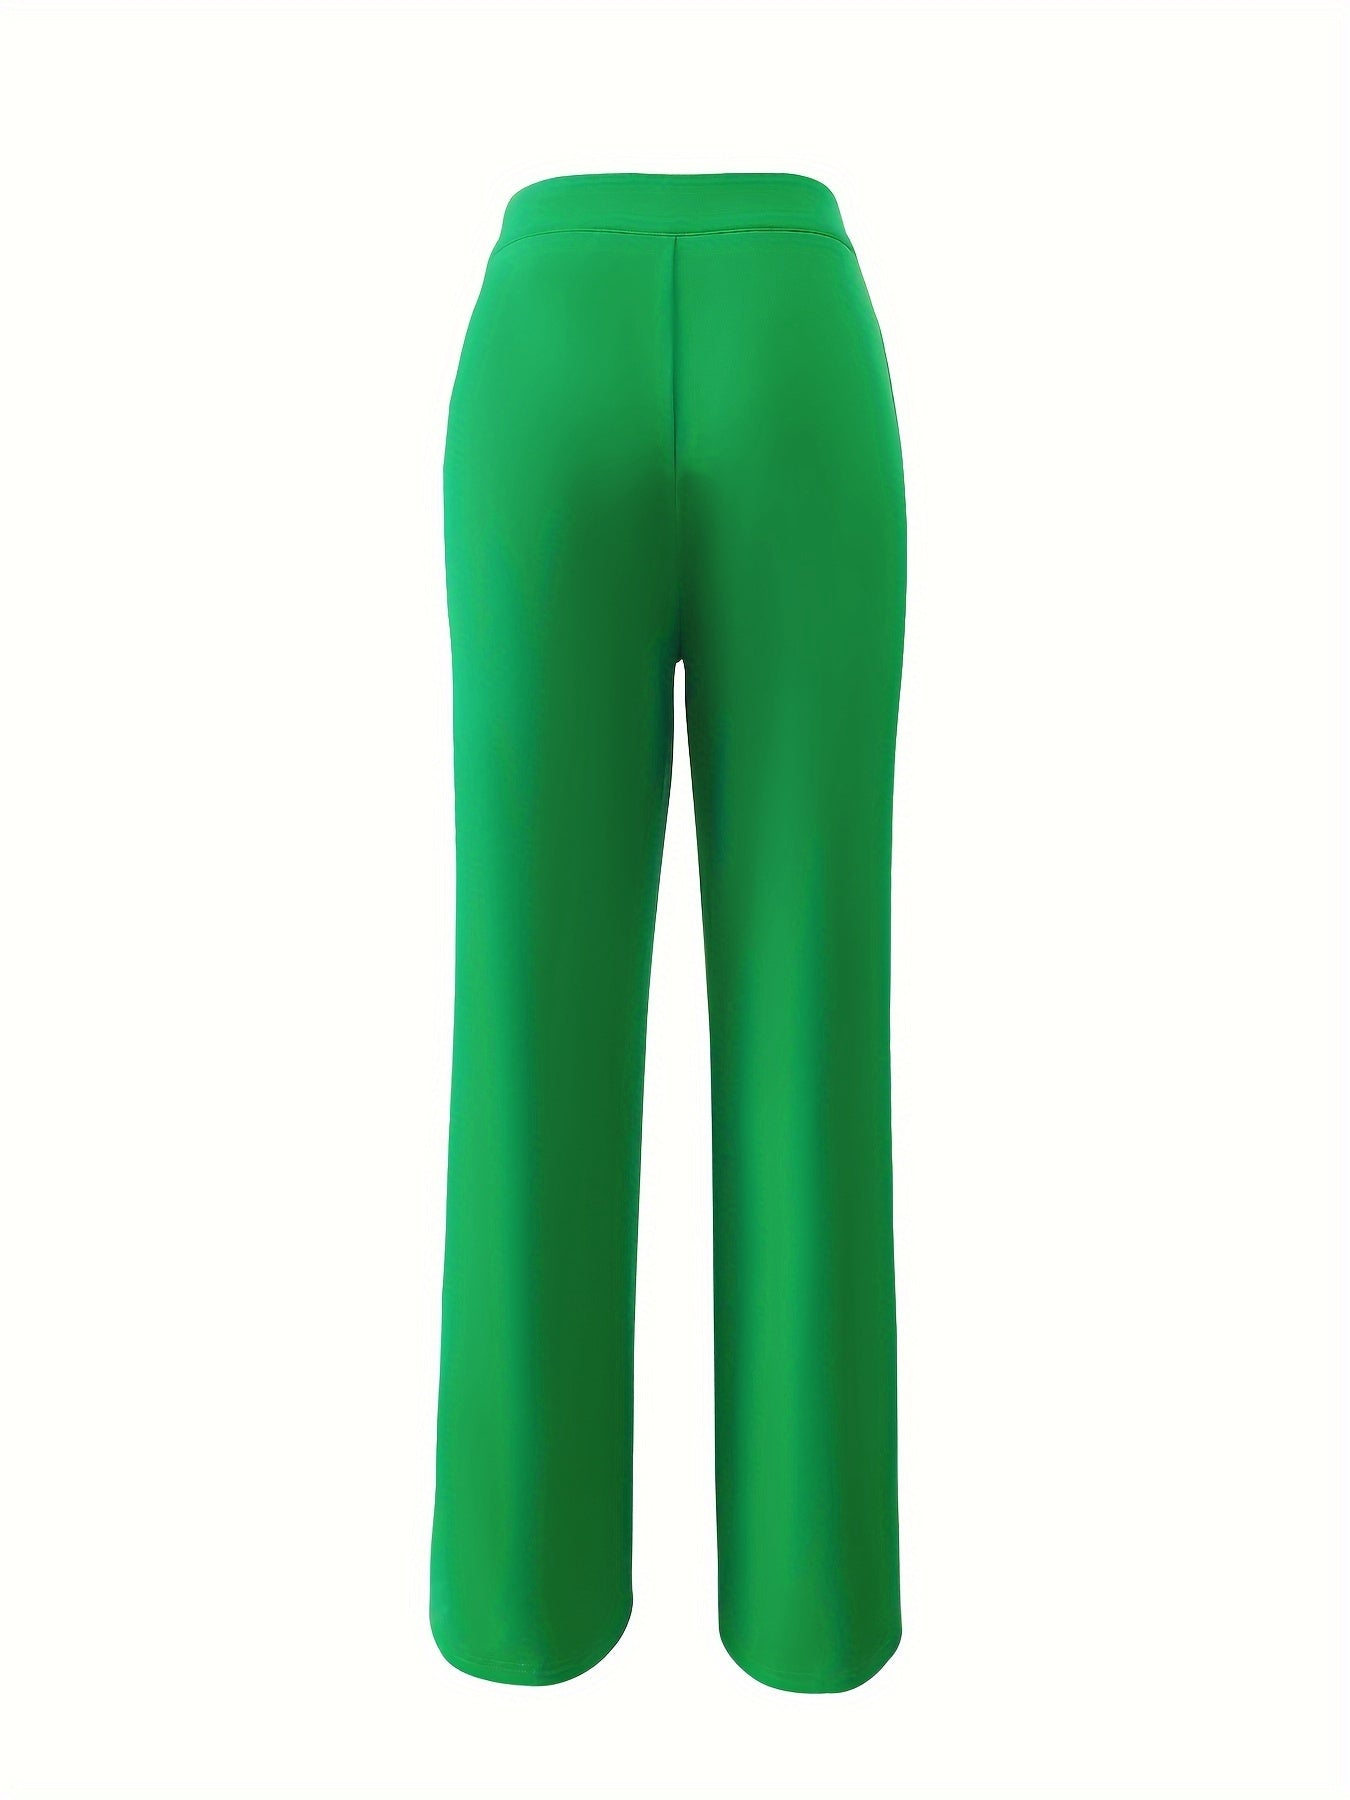 Solid Button Front Pintuck Pants, Casual High Waist Pants, Women's Clothing